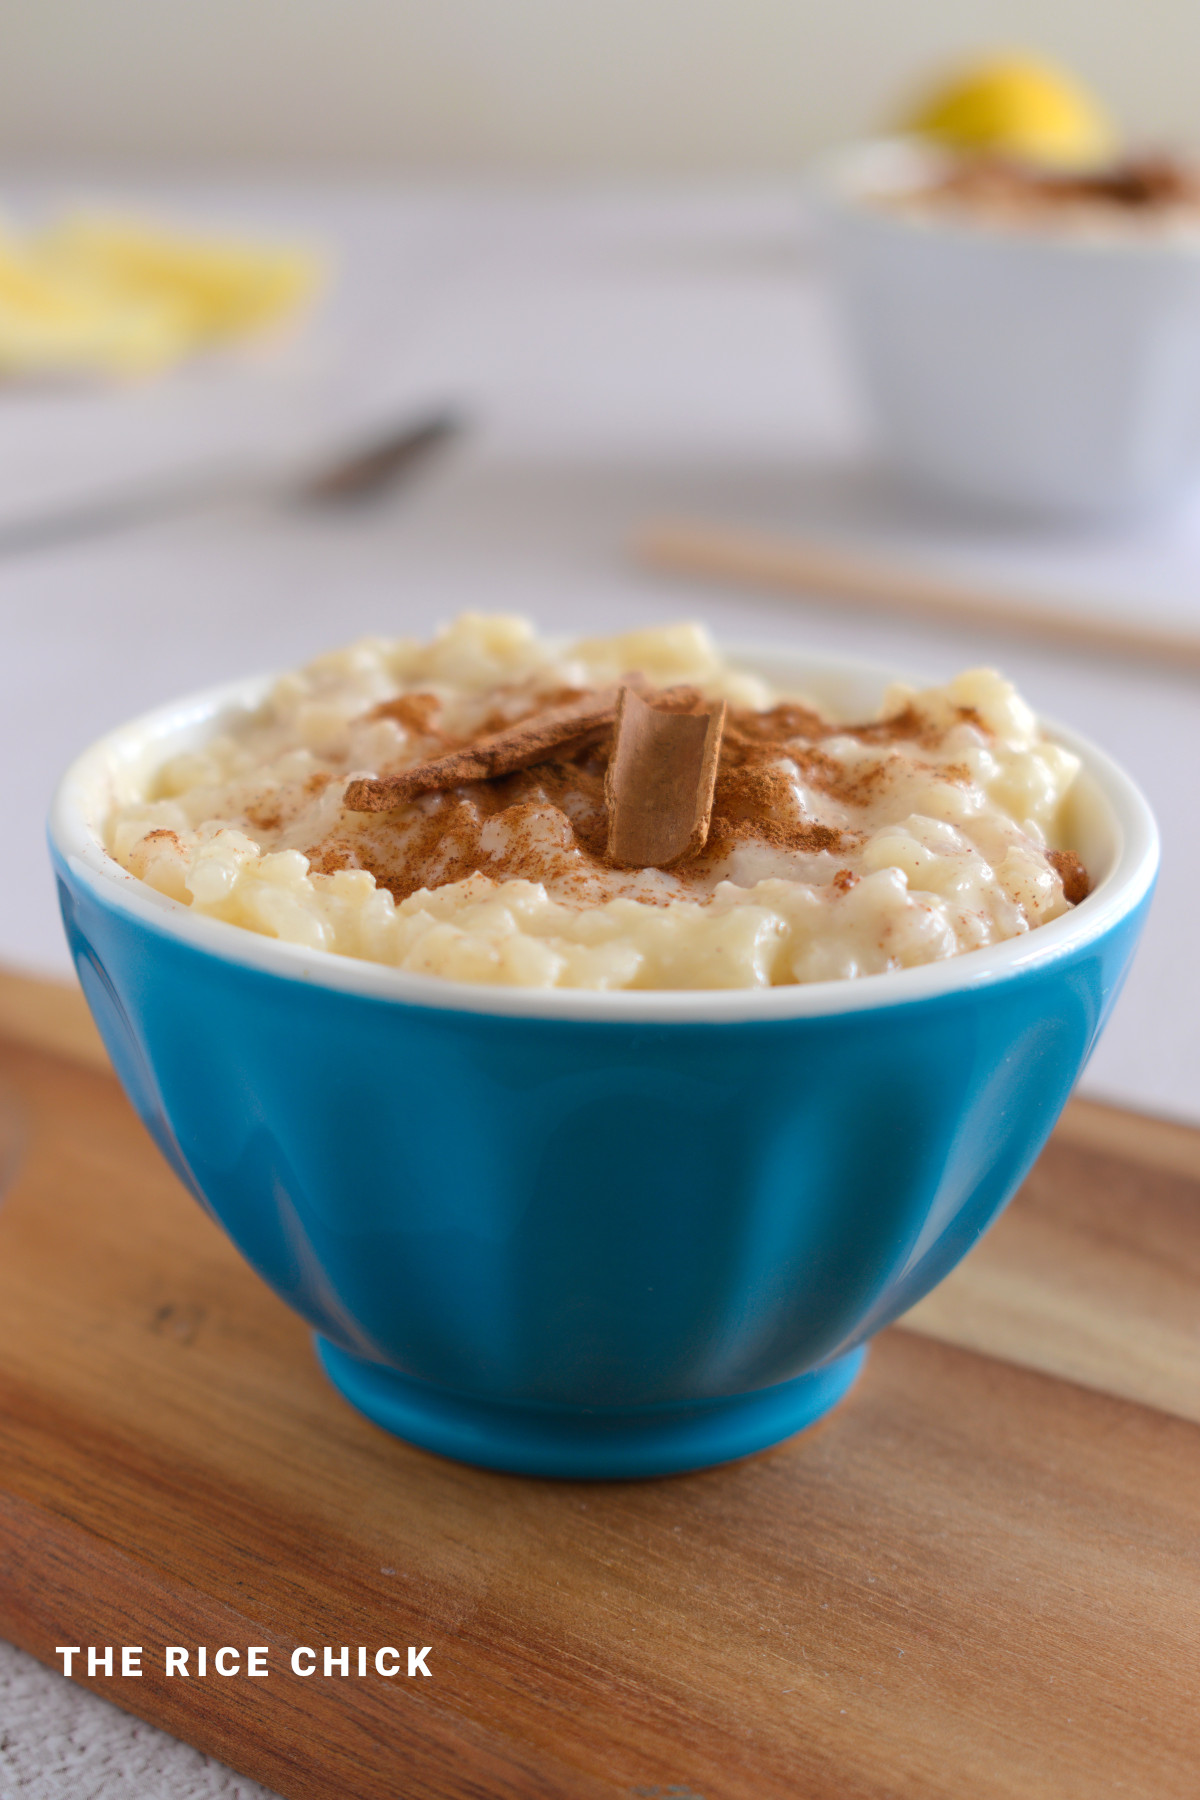 Arroz doce pudding in a small blue bowl.